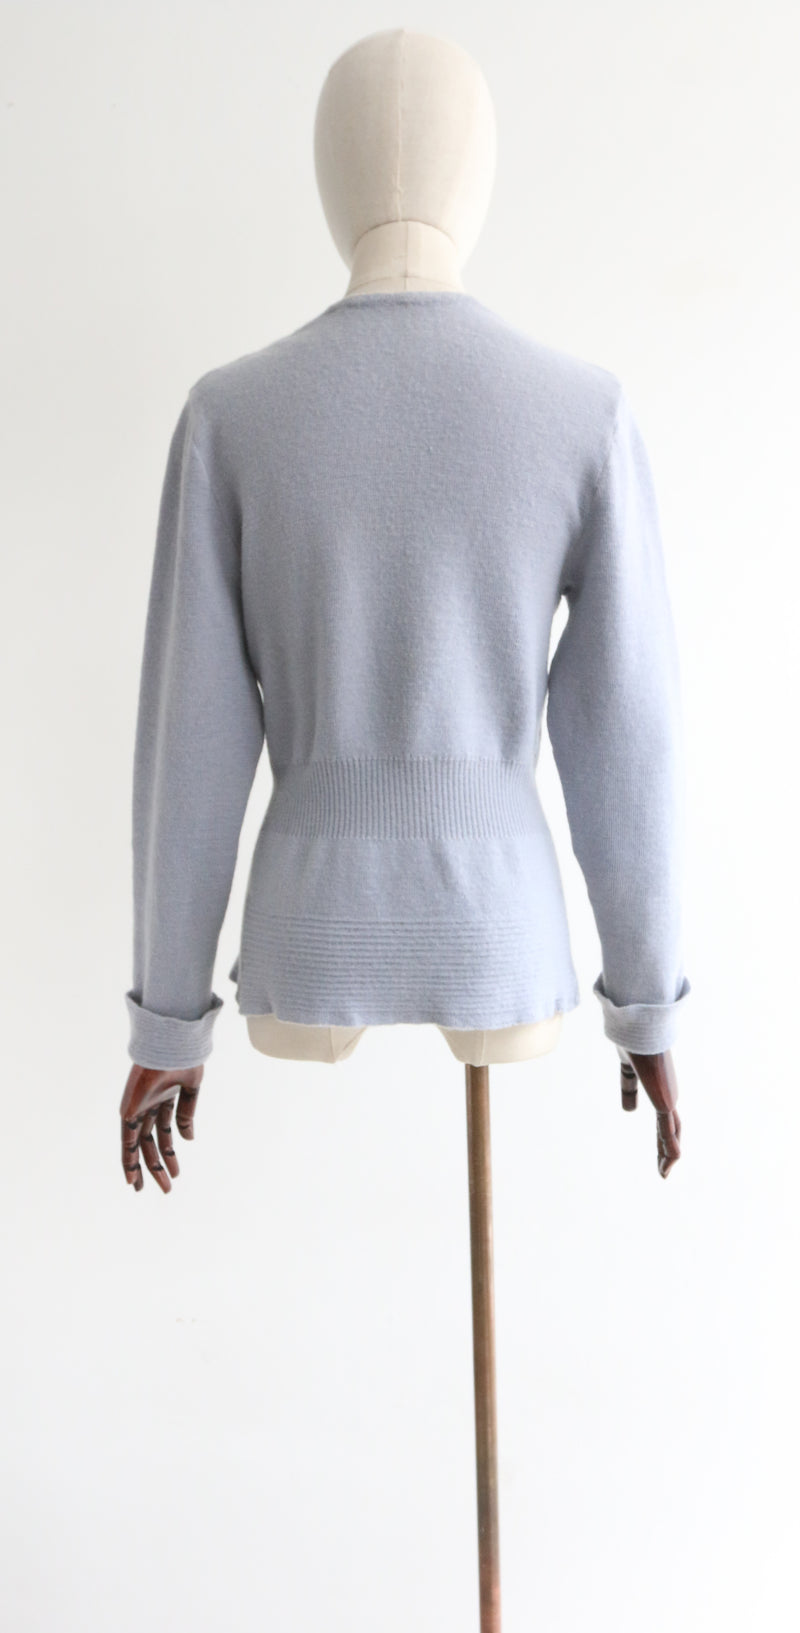 "French Blue" Vintage 1940's French Blue Knitted Cardigan UK 10 US 6